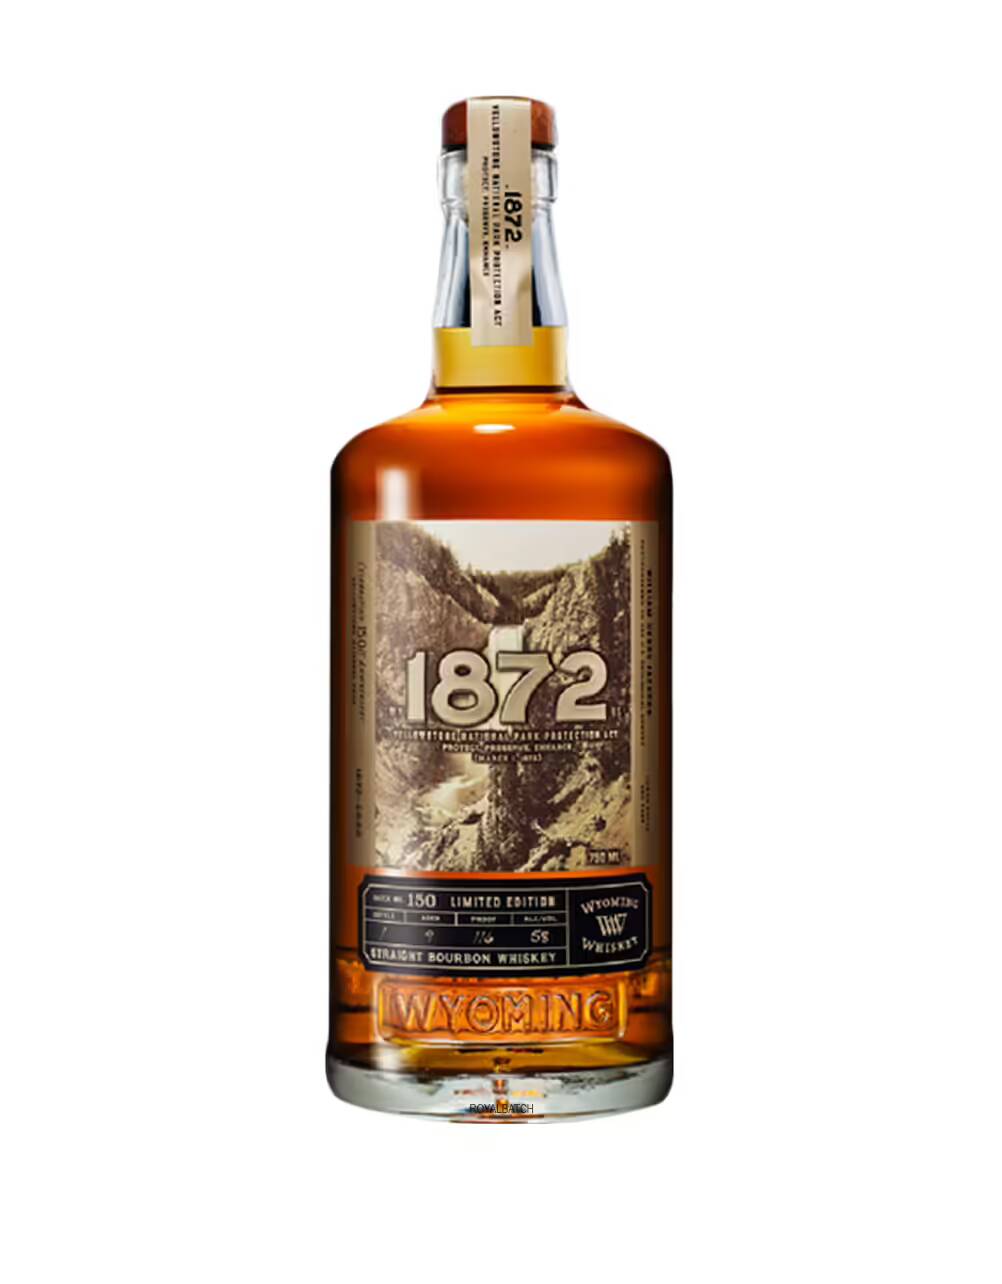 Wyoming 1872 straight bourbon whiskey - Limited Edition